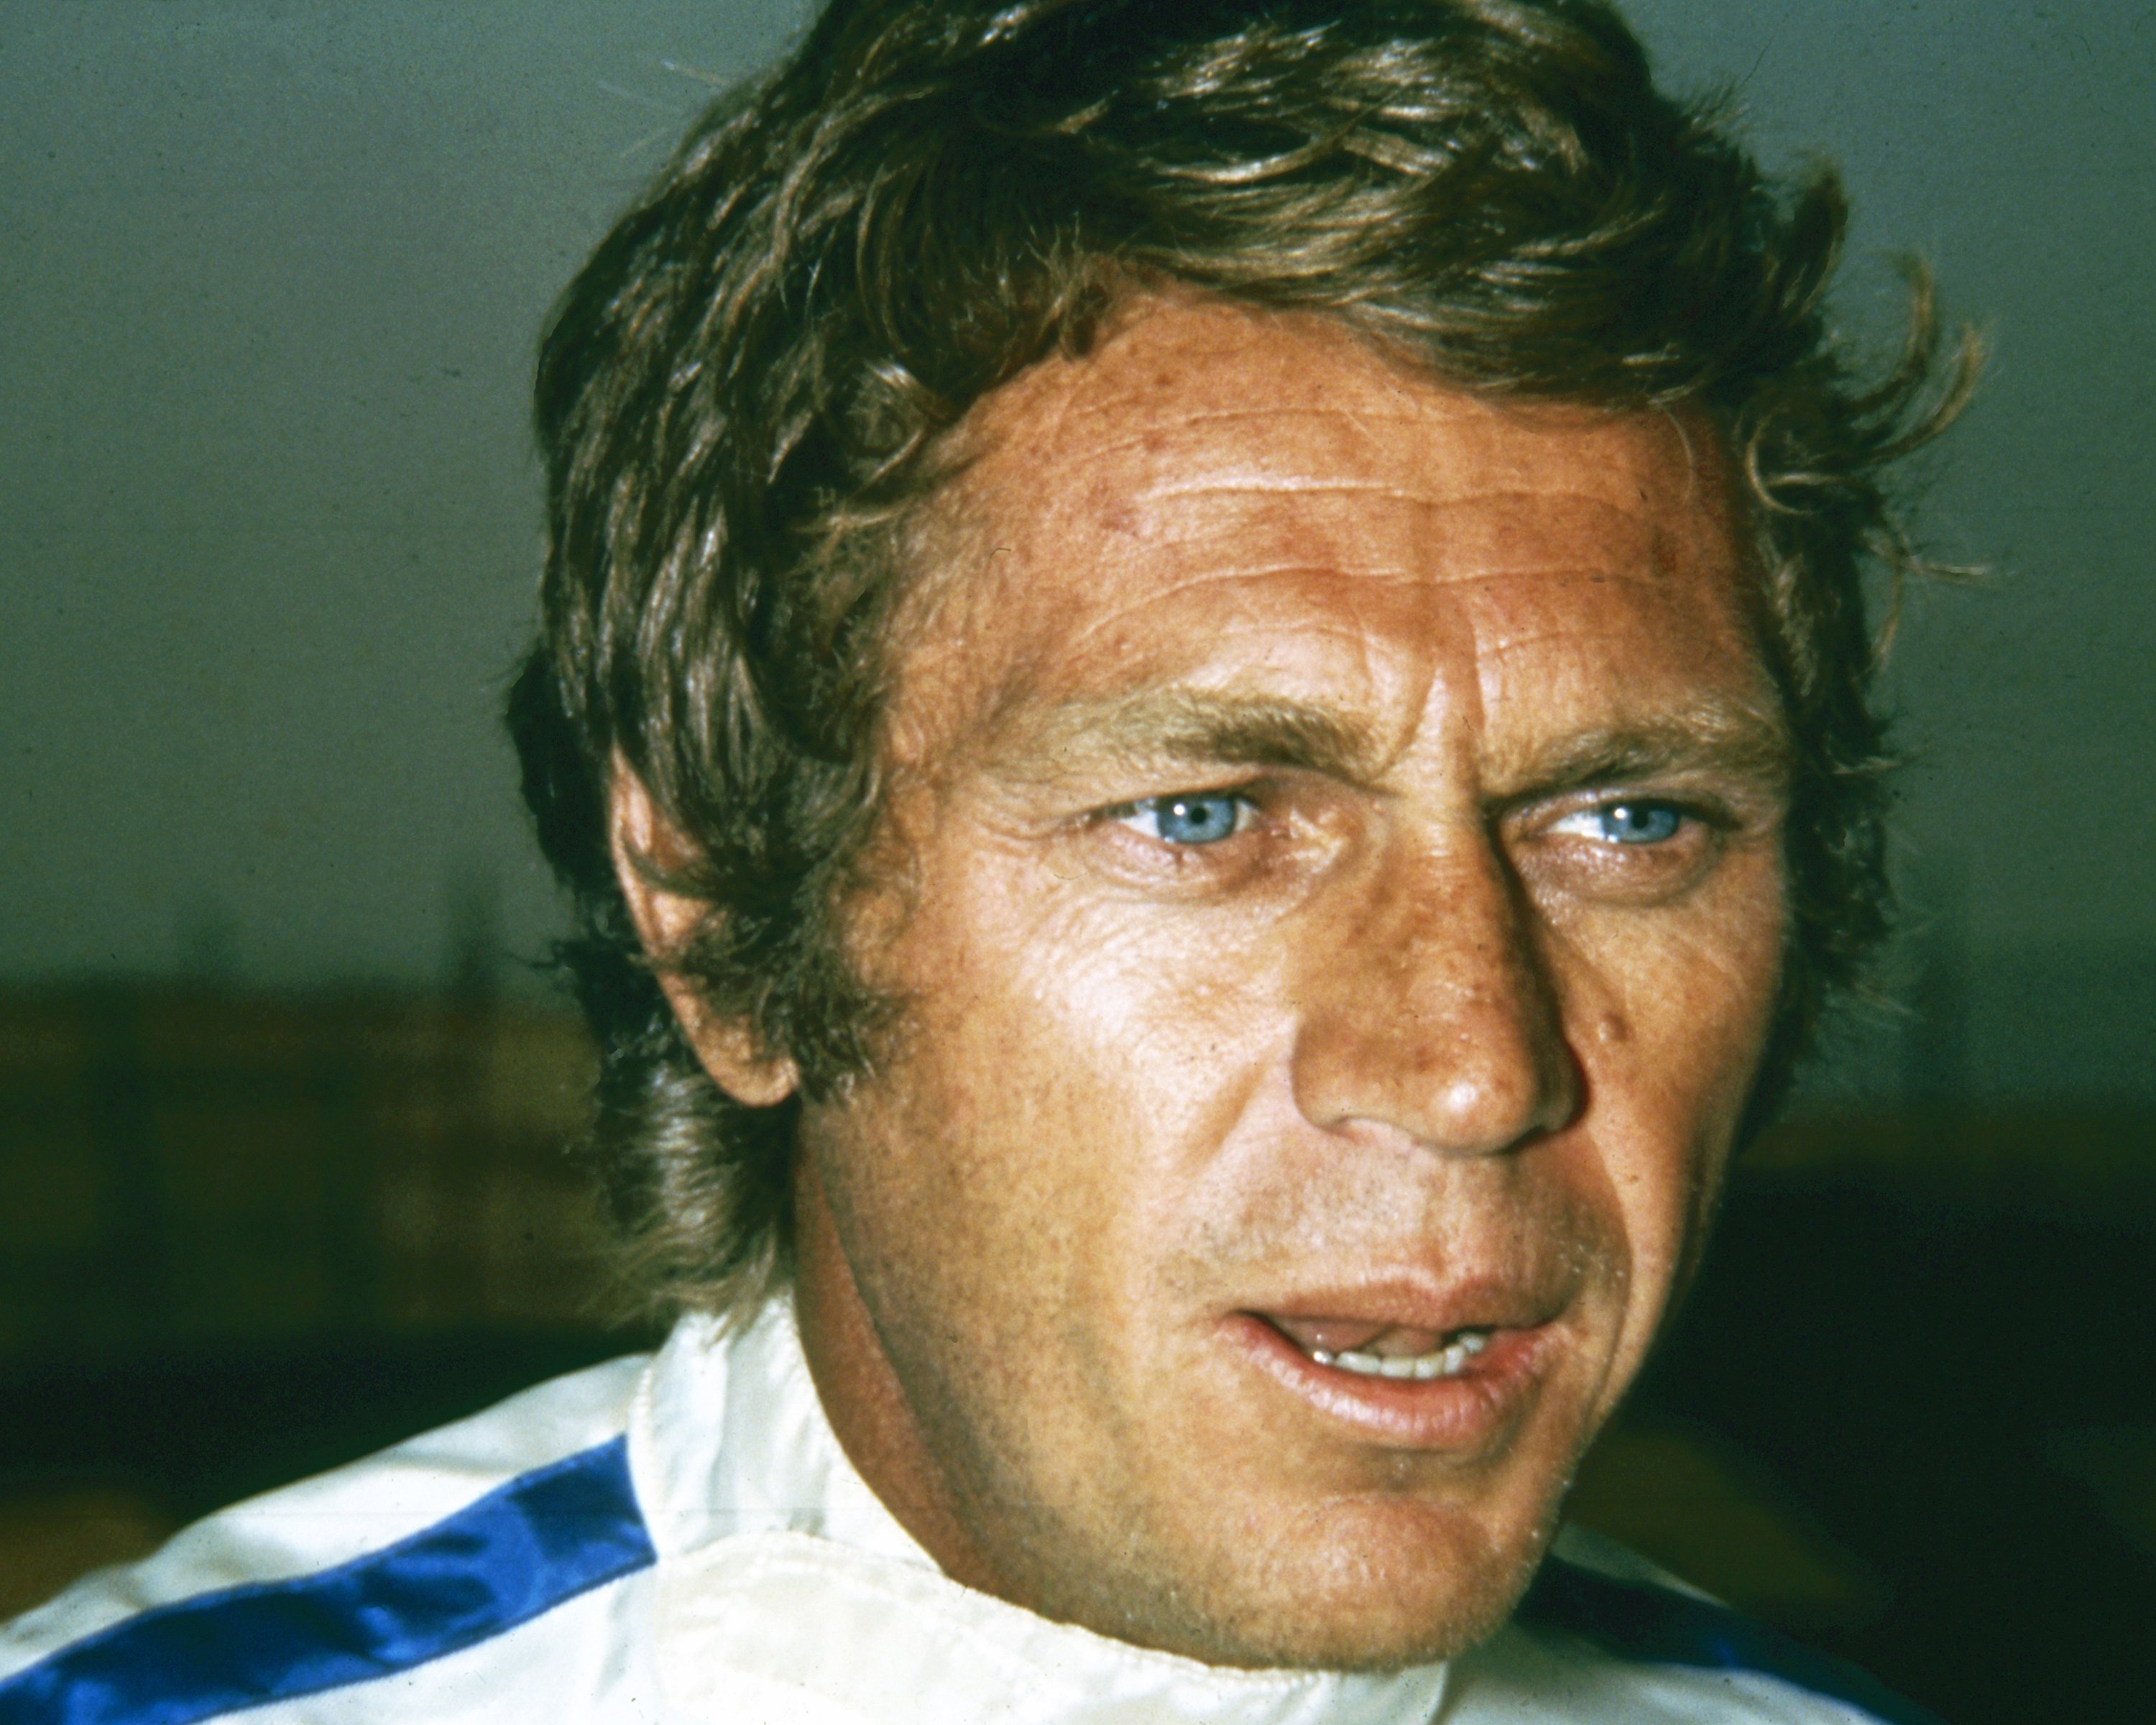 Steve McQueen on the set of "Le Mans" circa 1971 | Source: Getty Images